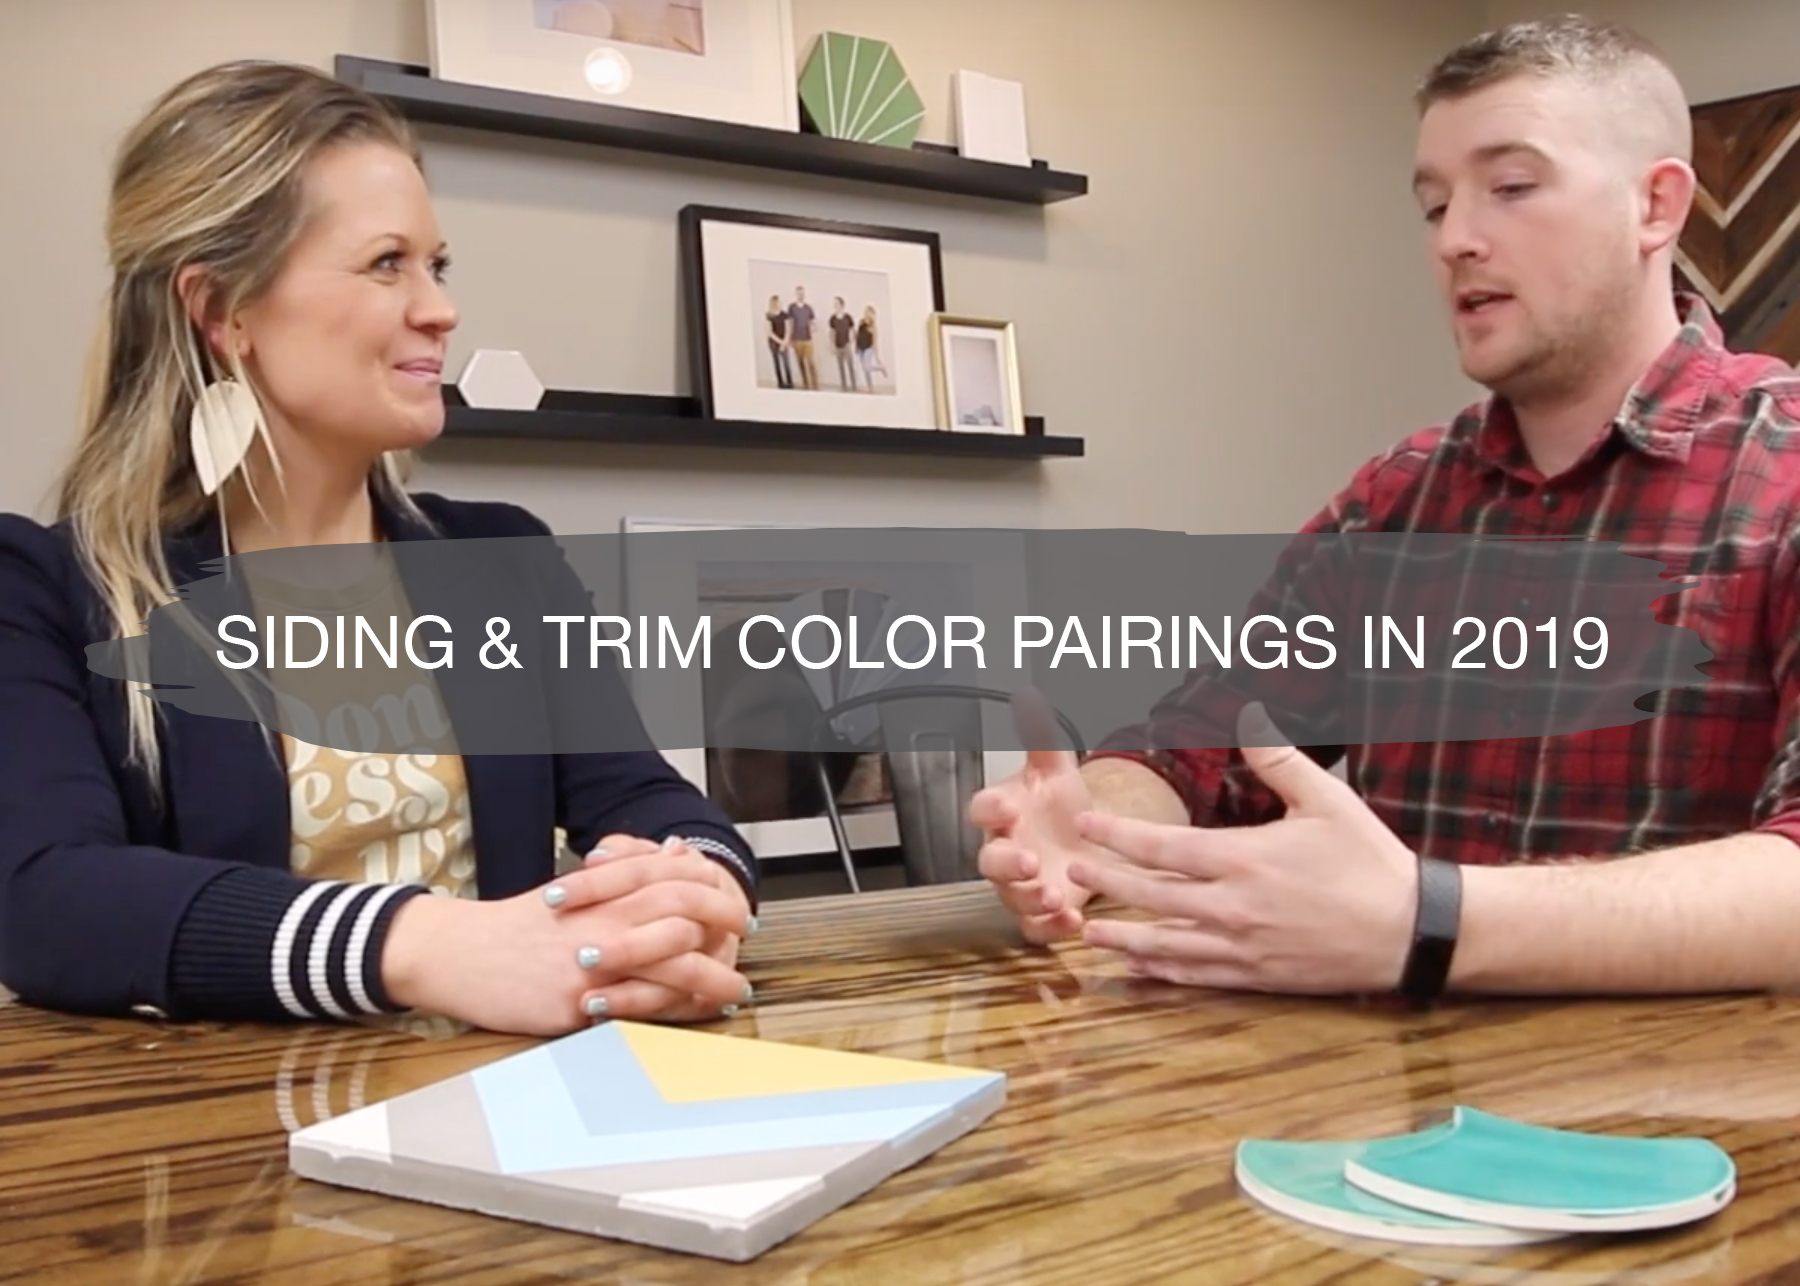 Siding and Trim Pairings in 2019